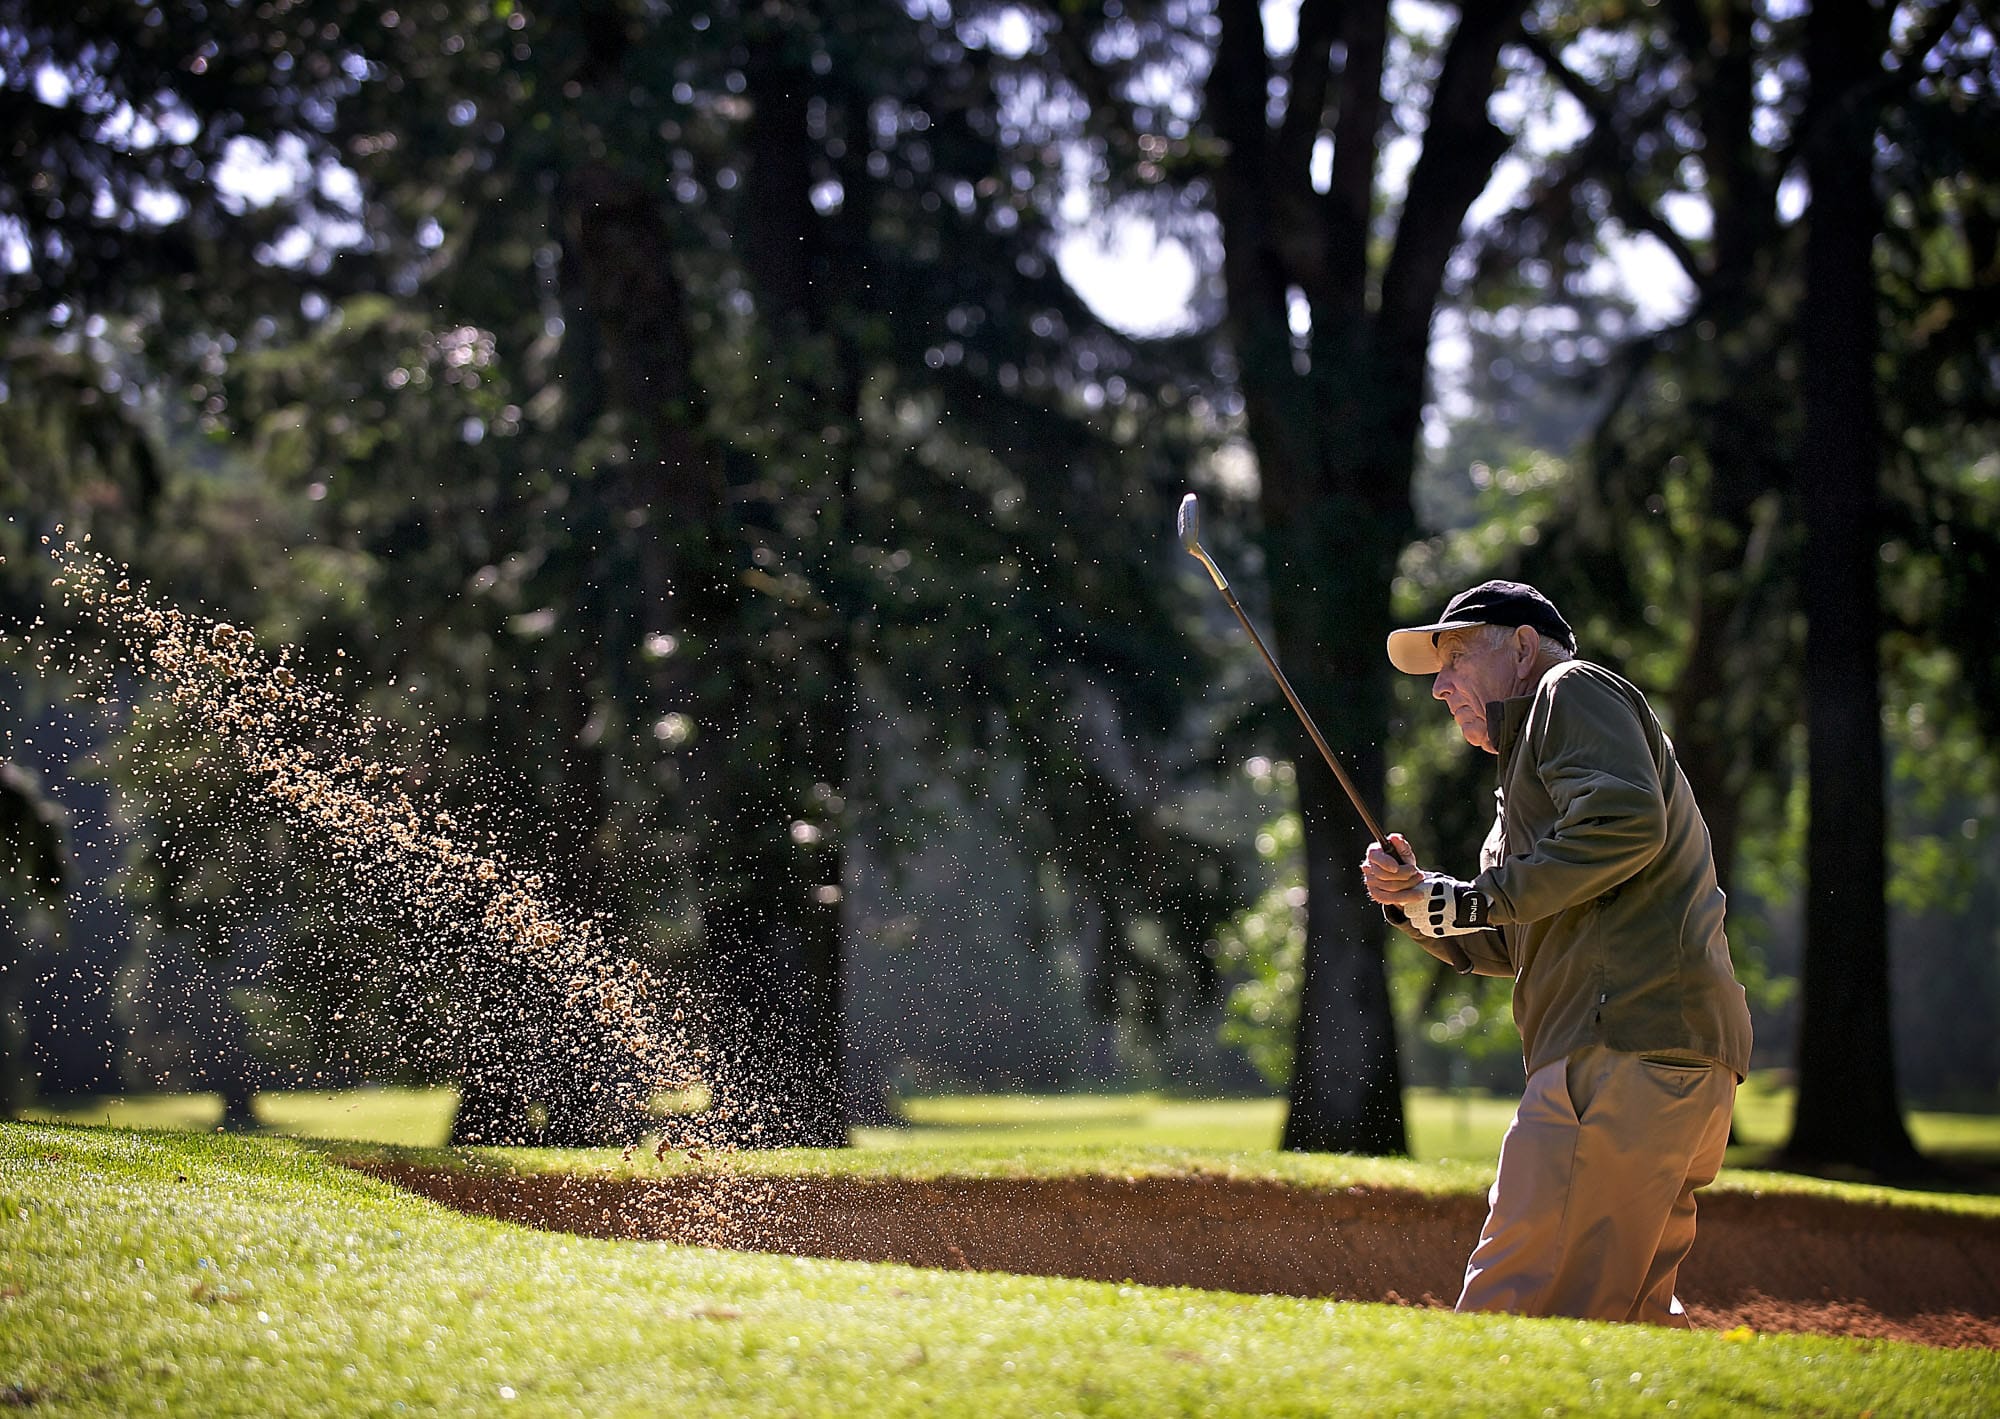 Kent Myers hits out of the sand trap on the 15th hole at Royal Oaks Country Club on Friday June 6, 2014.